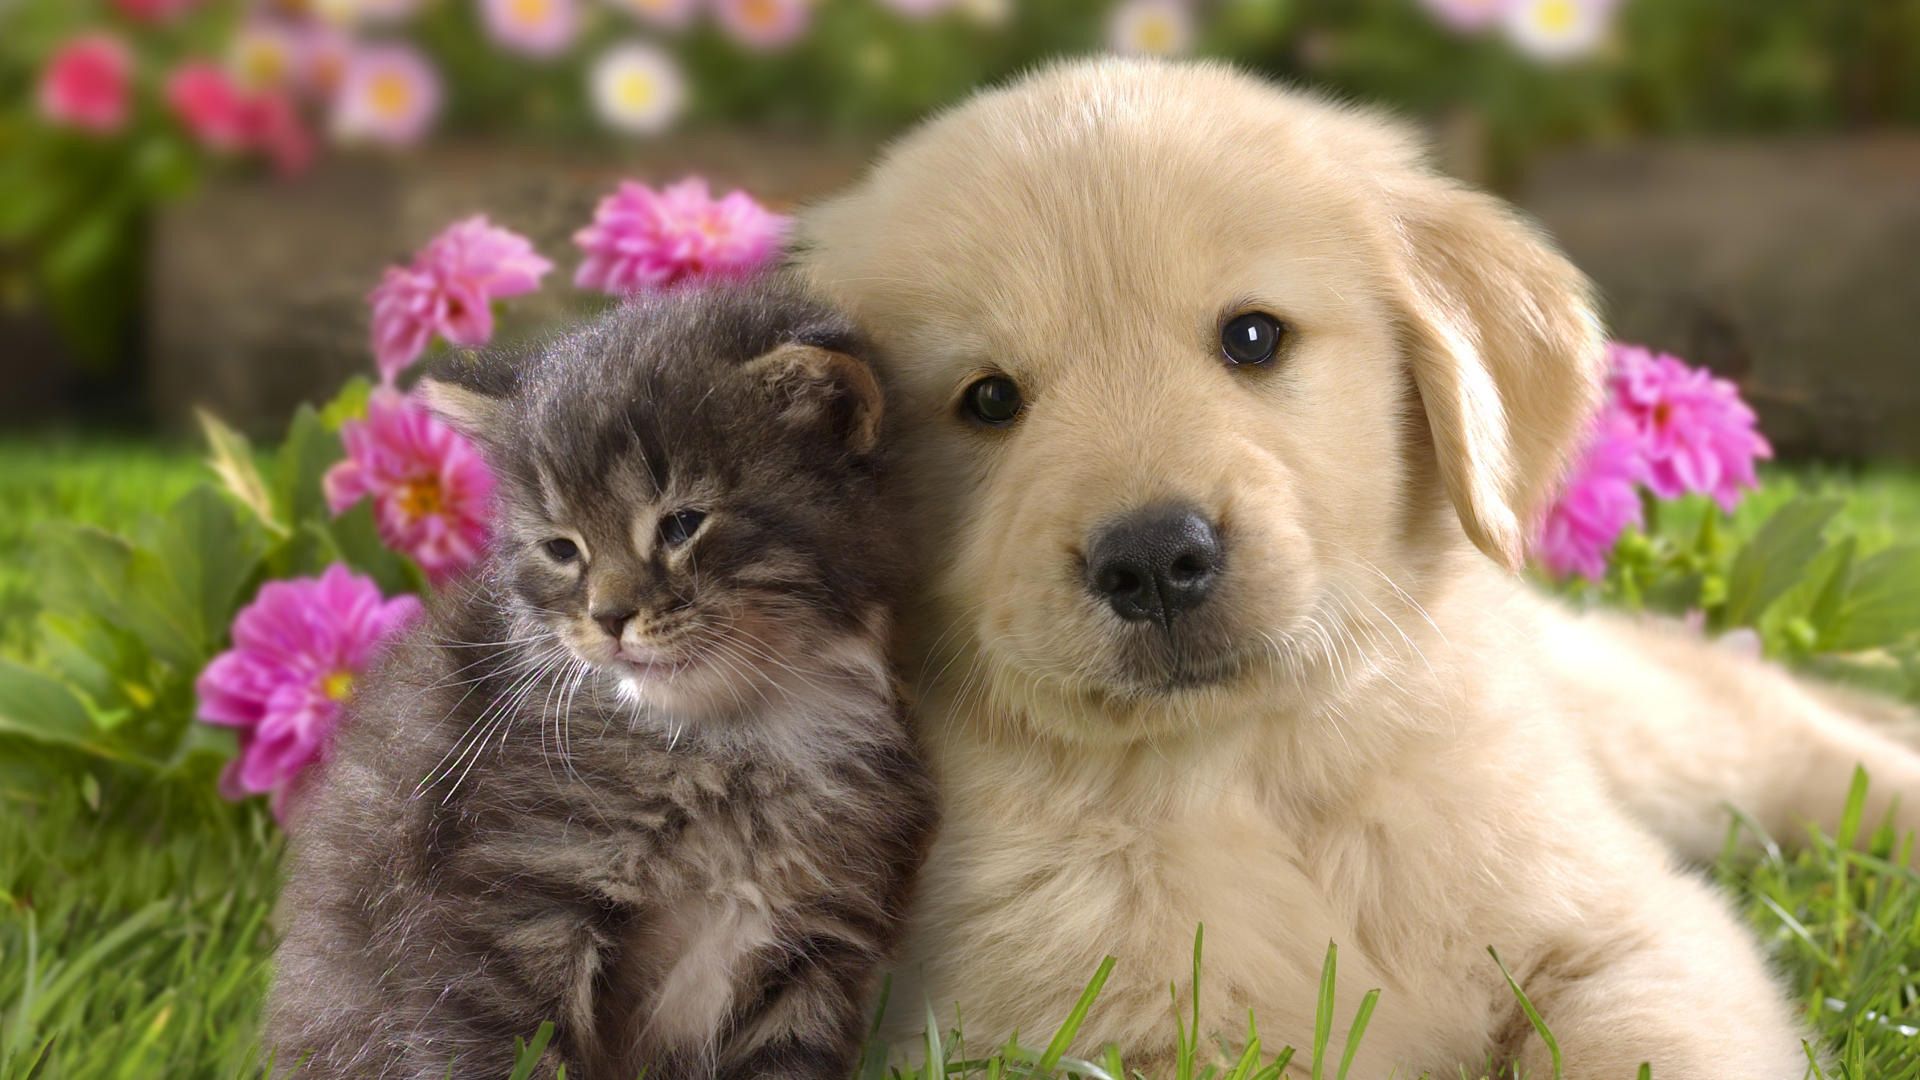 Dog Wallpaper Cute Cat And Yorkshire Terrier